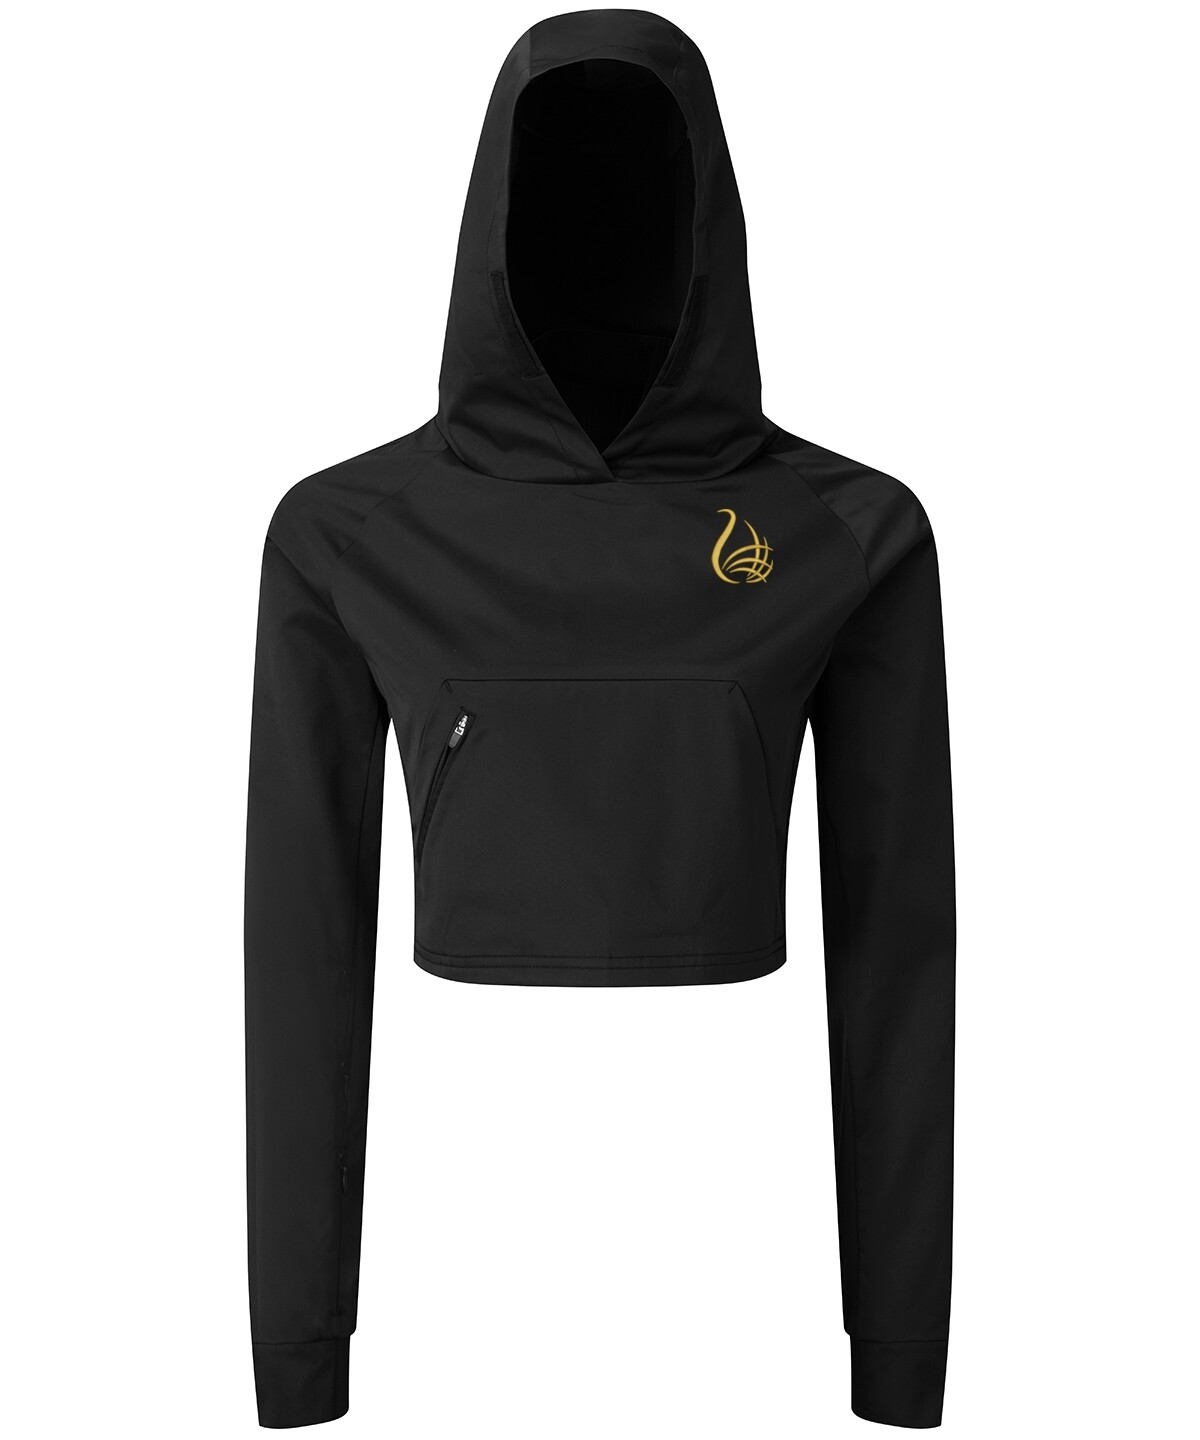 Women's cropped hooded long sleeve t-shirt